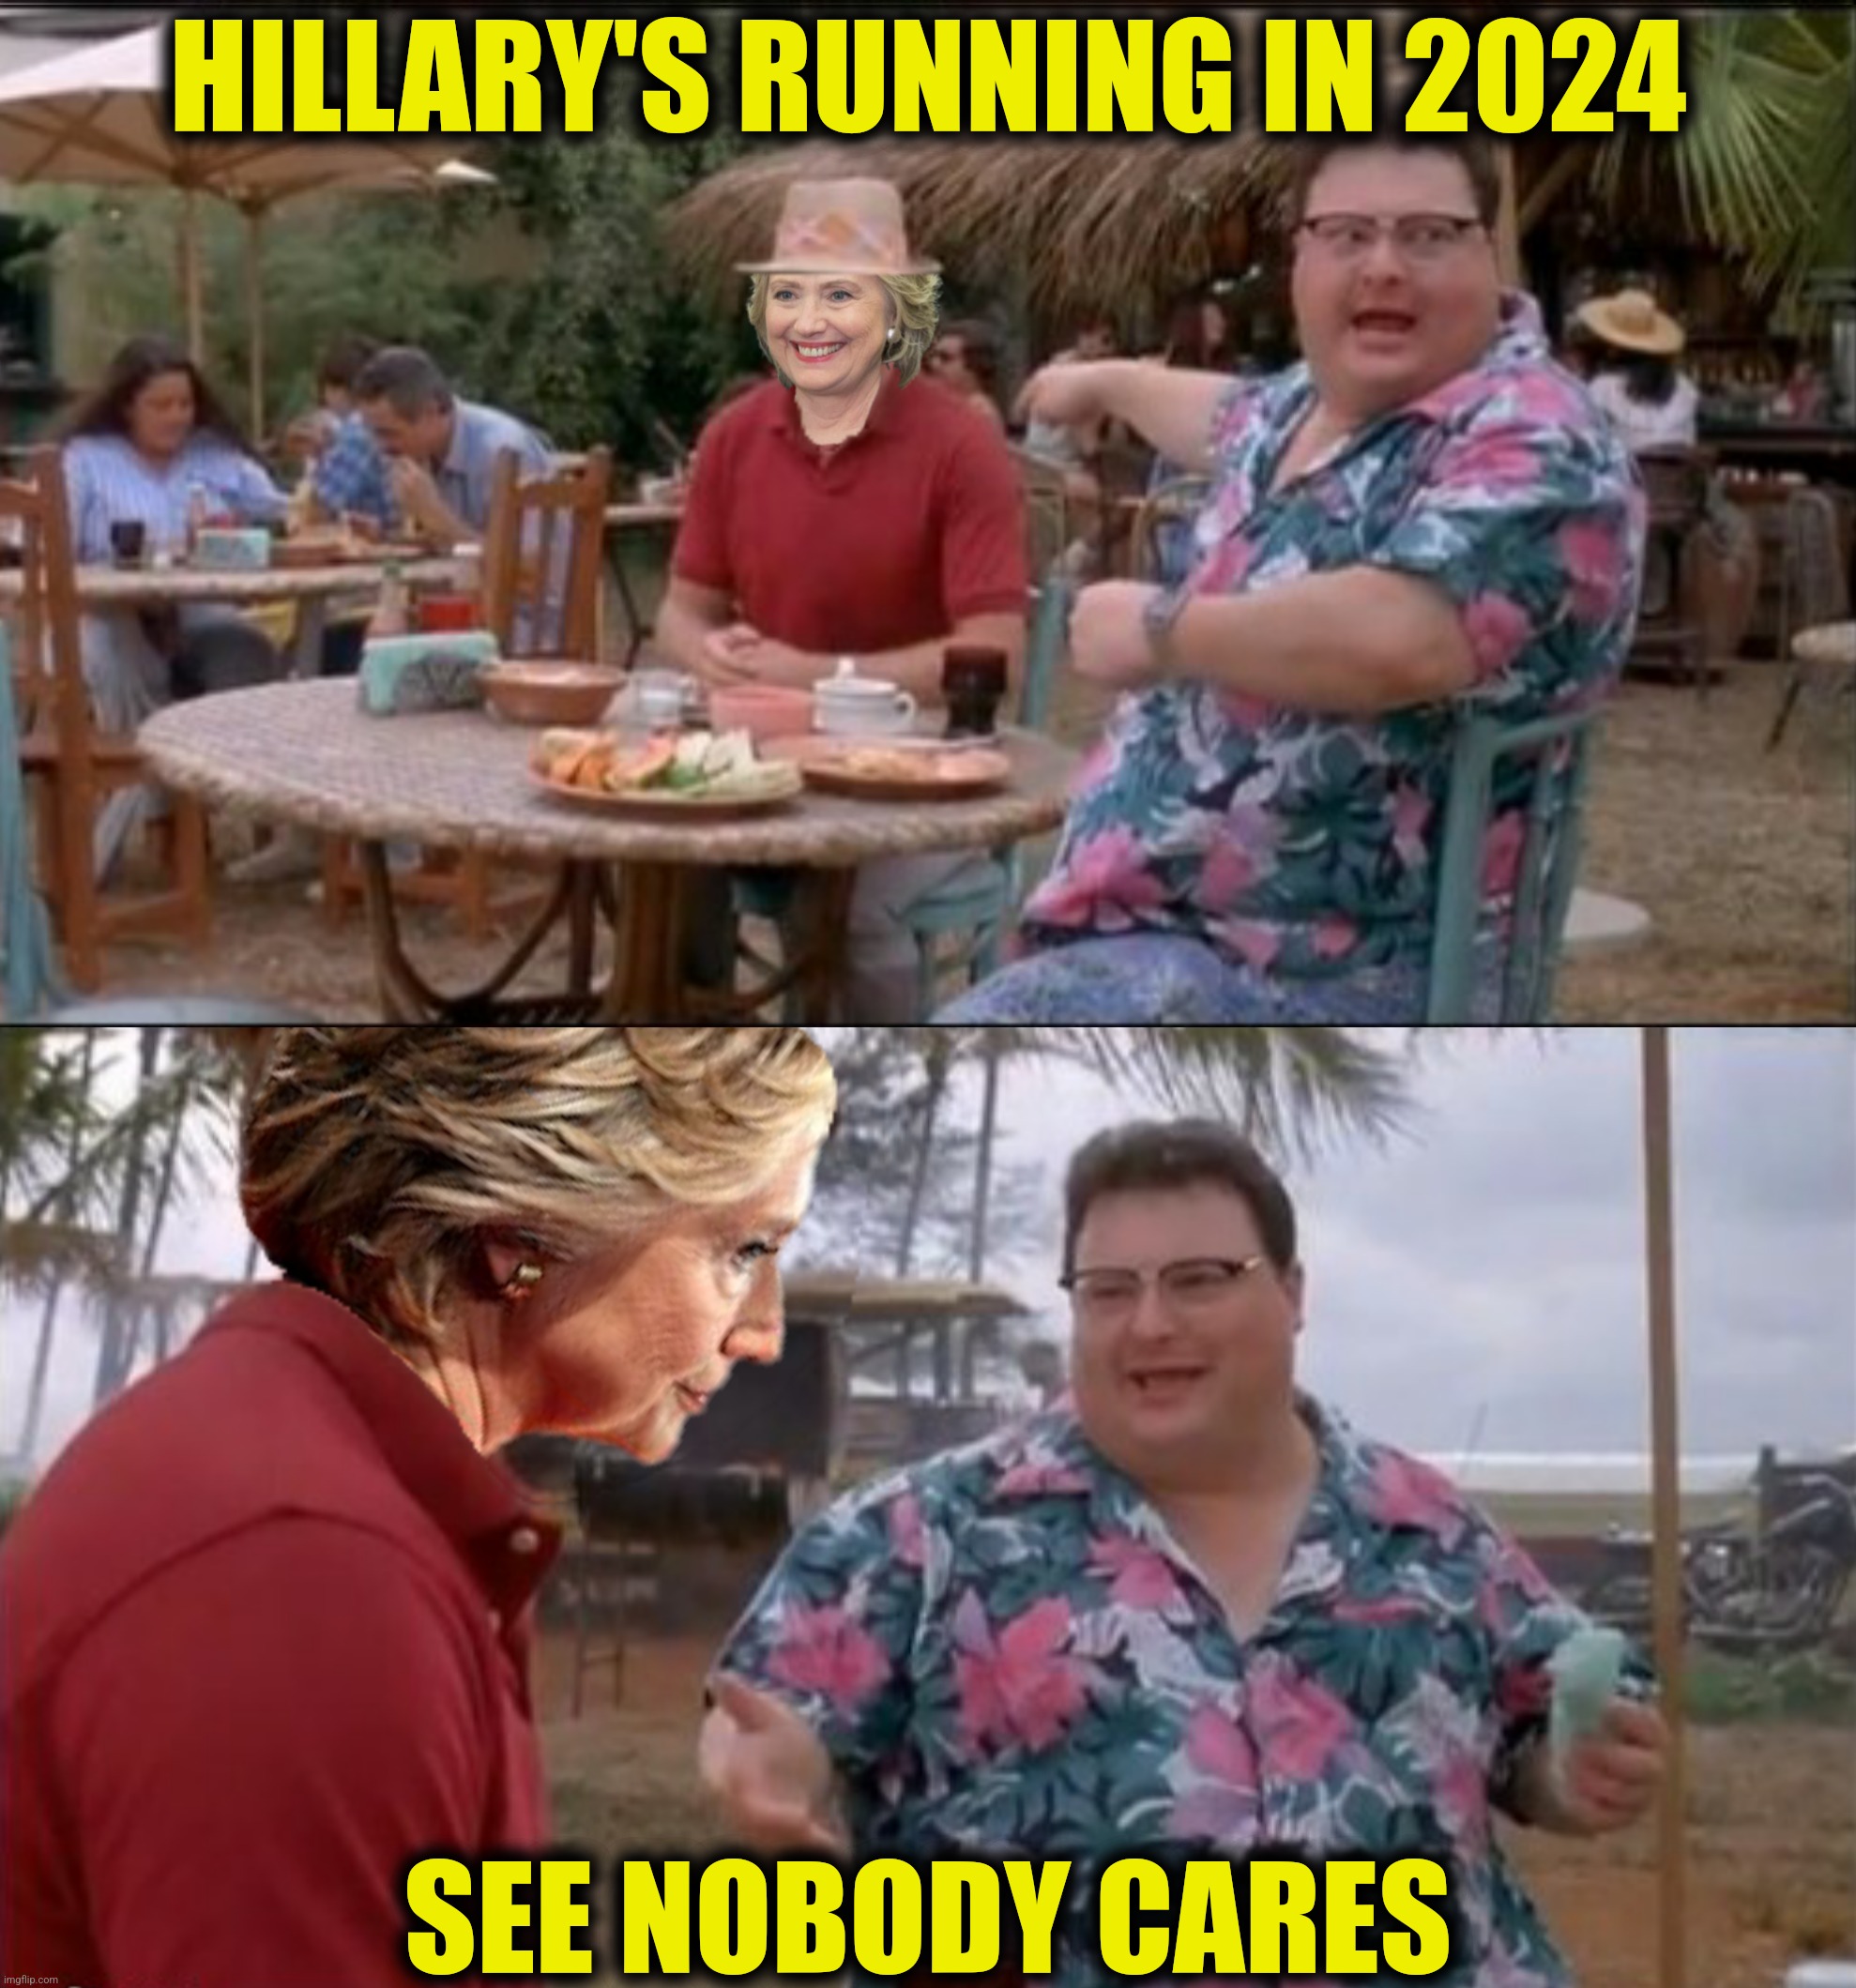 HILLARY'S RUNNING IN 2024 SEE NOBODY CARES | made w/ Imgflip meme maker